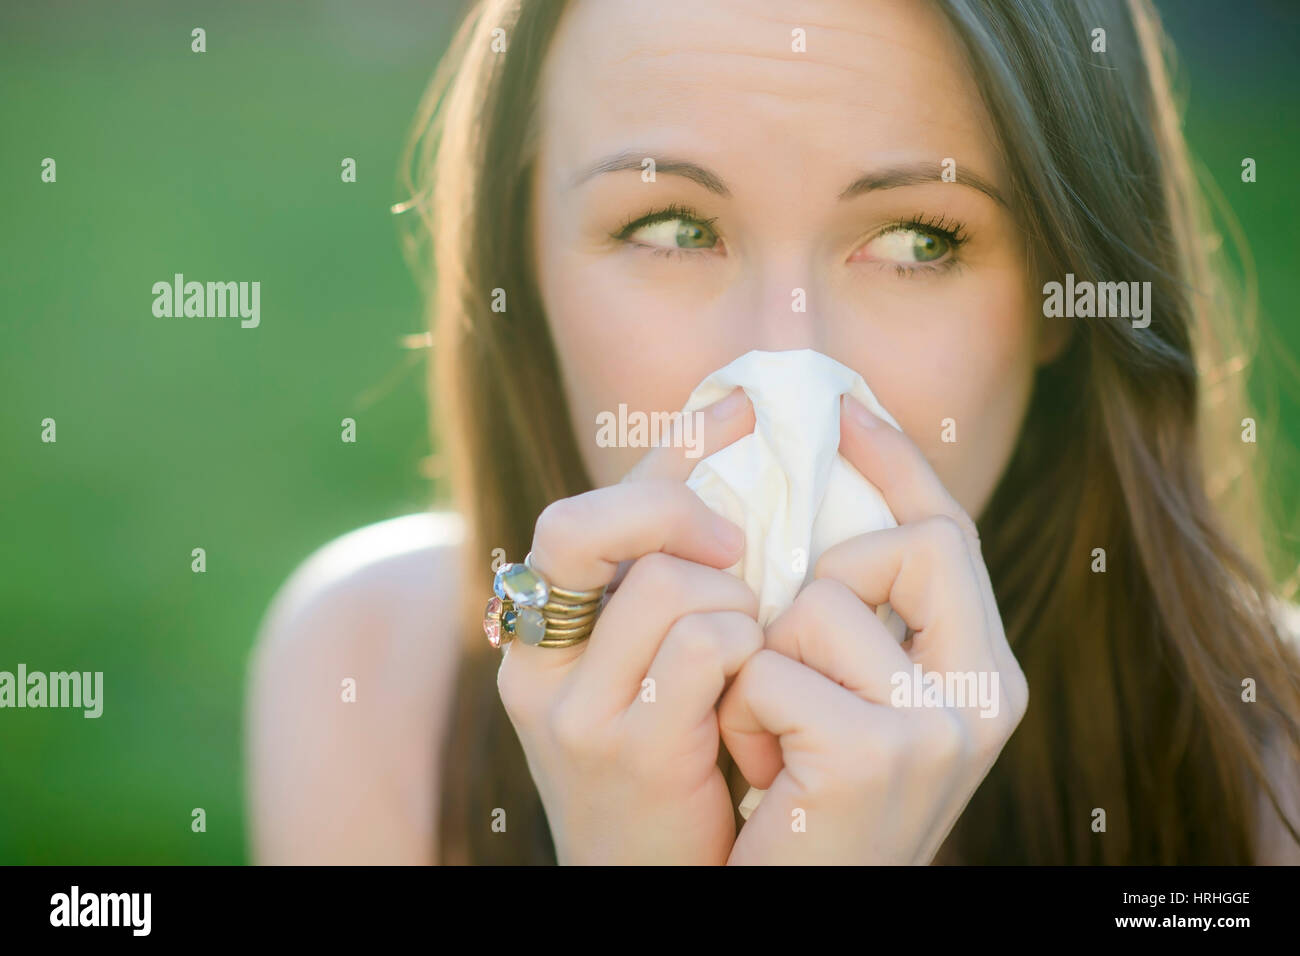 Junge Frau mit Pollenallergie - woman with pollen allergy in spring Stock Photo